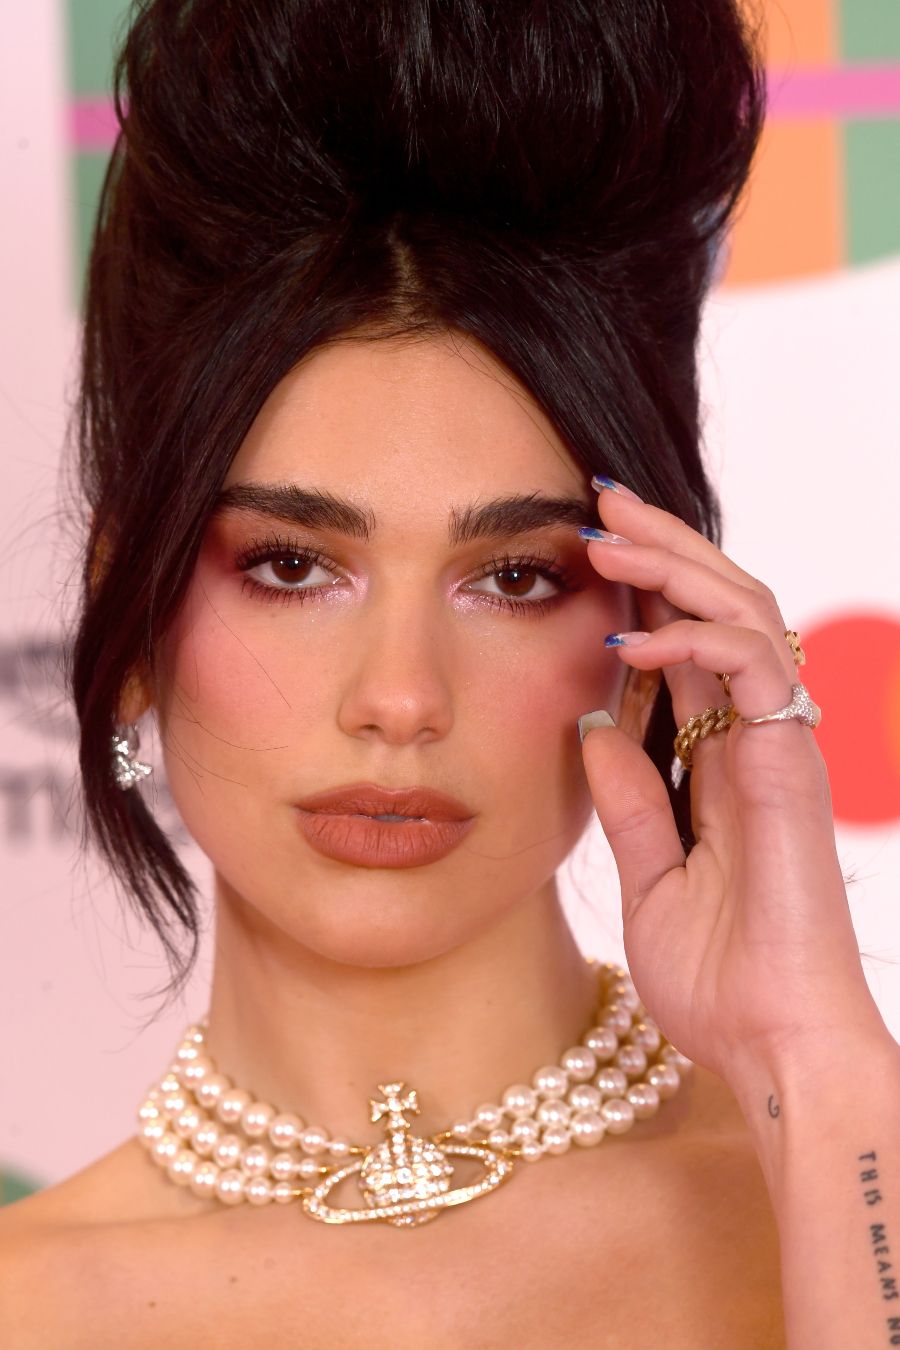 The BRIT Awards 2021 - VIP Arrivals LONDON, ENGLAND - MAY 11: Dua Lipa attends The BRIT Awards 2021 at The O2 Arena on May 11, 2021 in London, England. (Photo by Dave J Hogan/Getty Images)